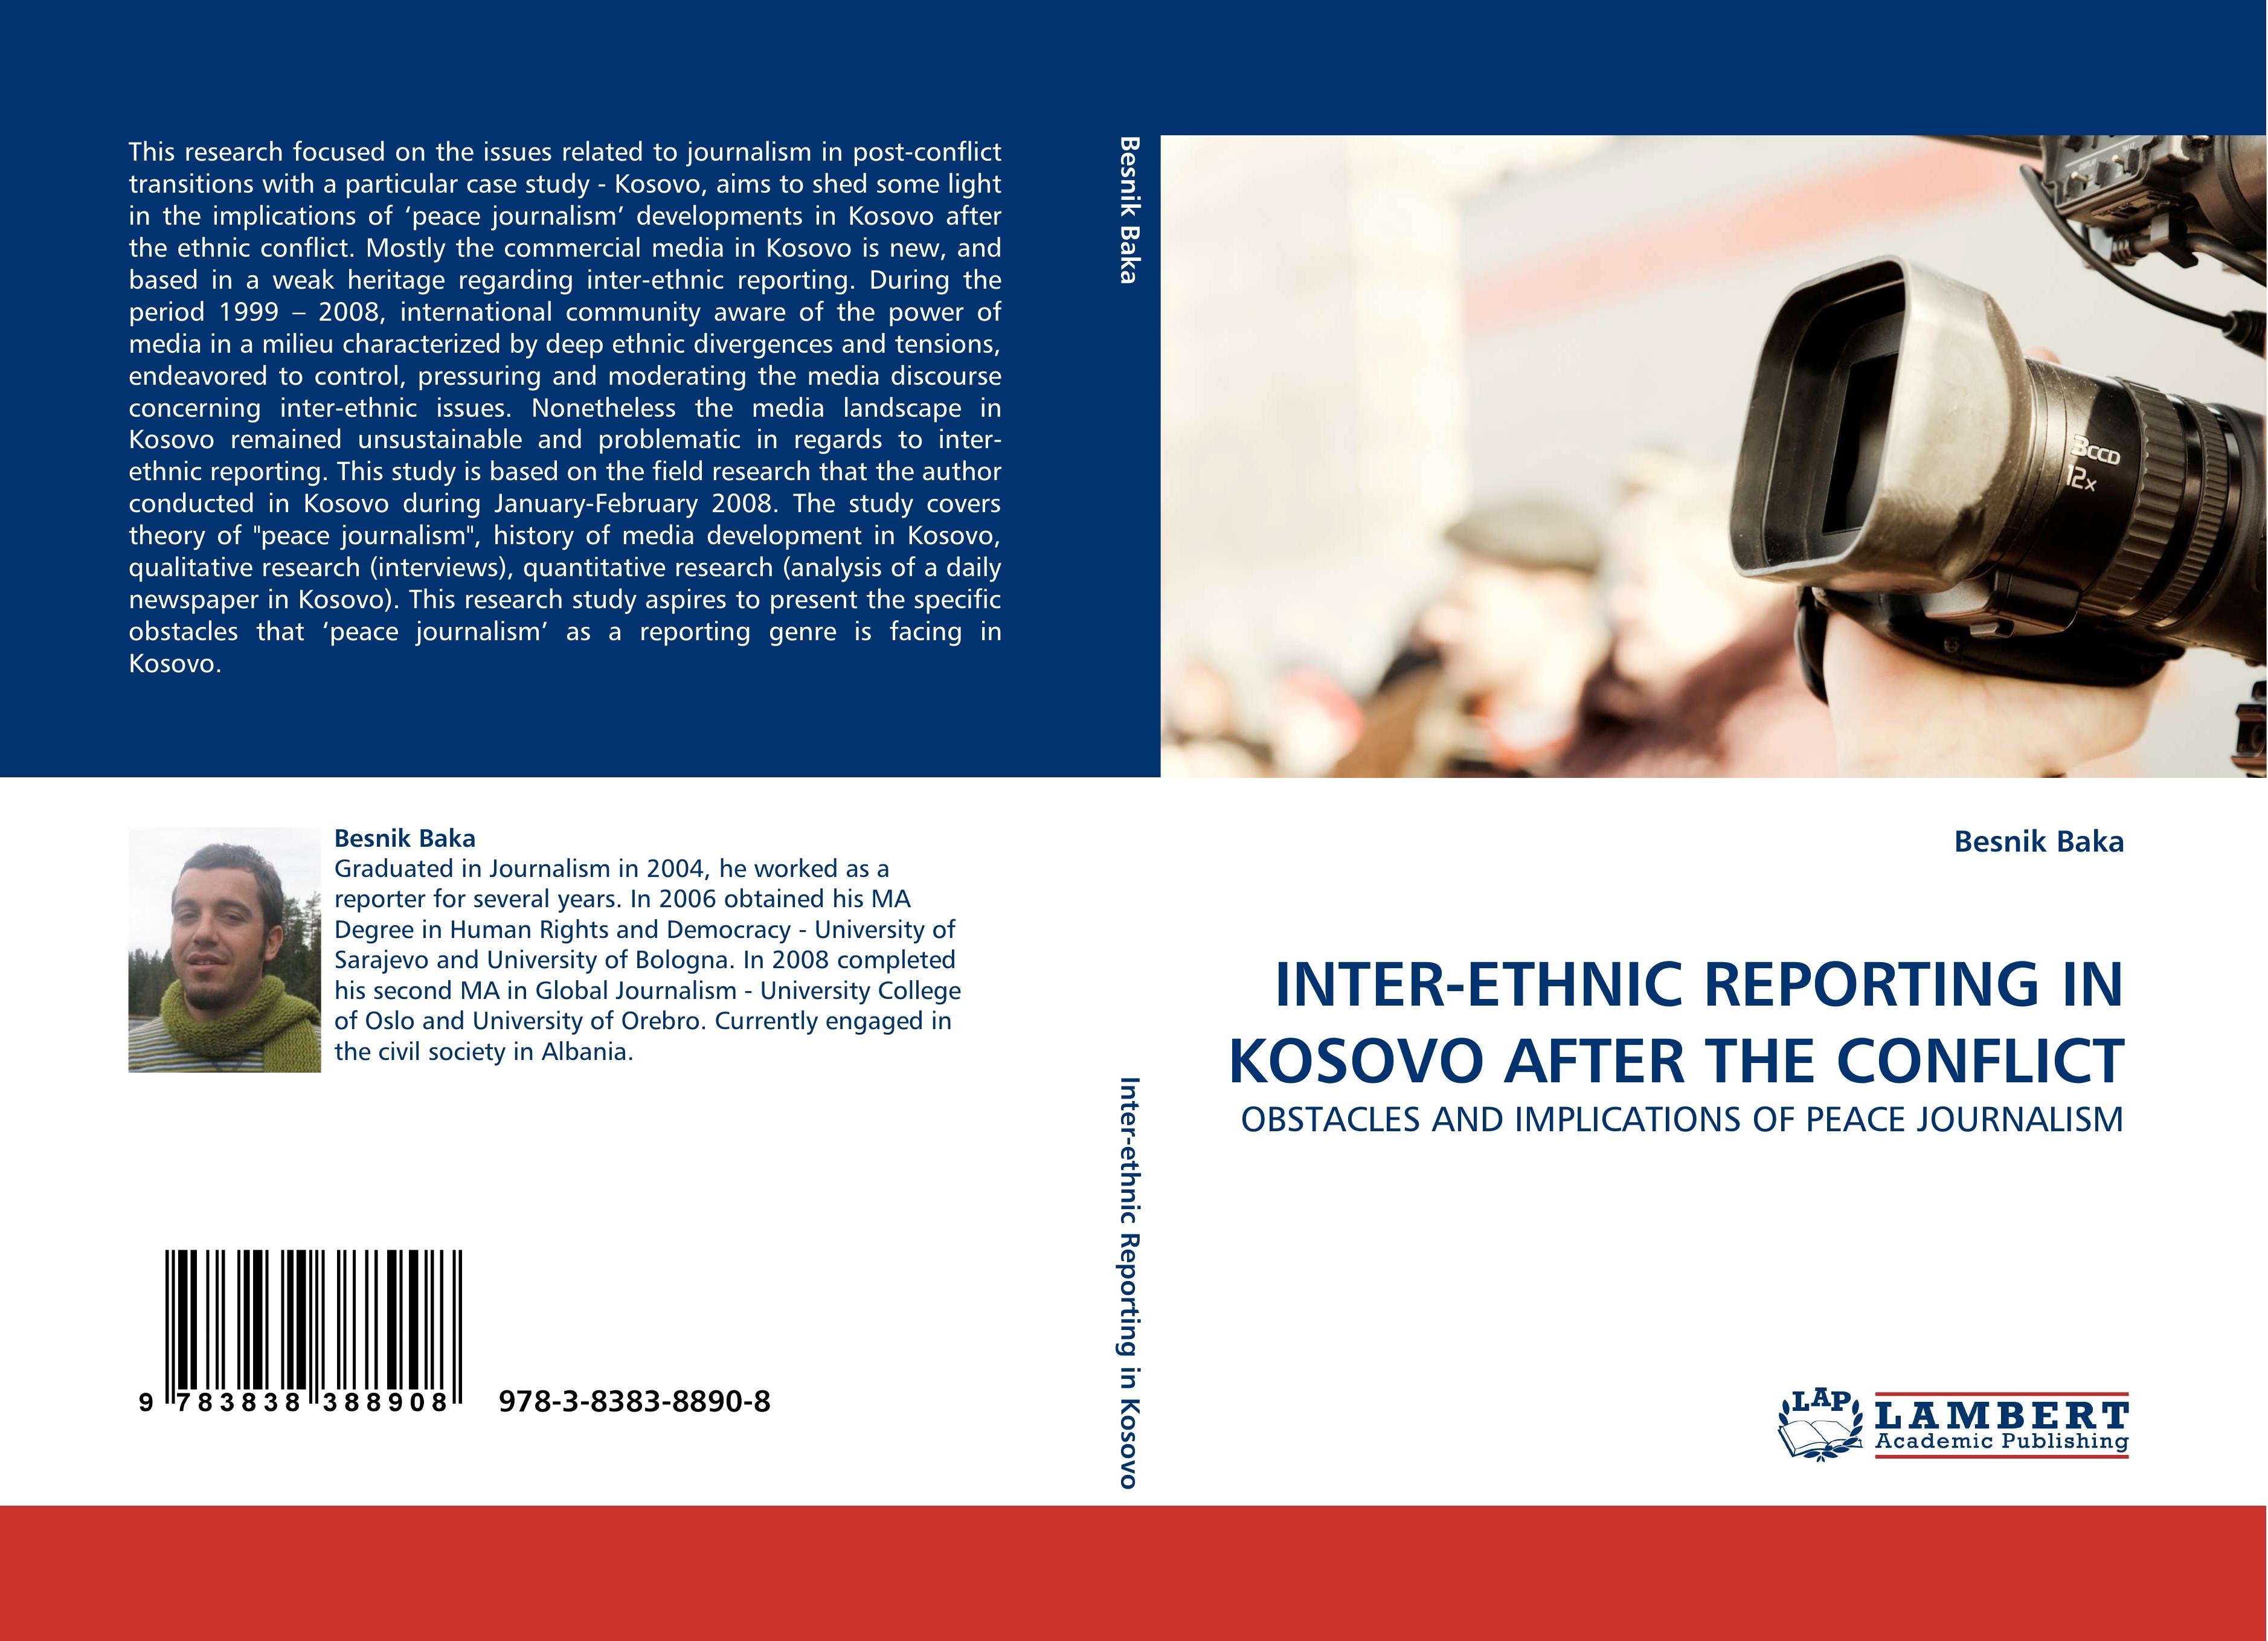 INTER-ETHNIC REPORTING IN KOSOVO AFTER THE CONFLICT - Besnik Baka